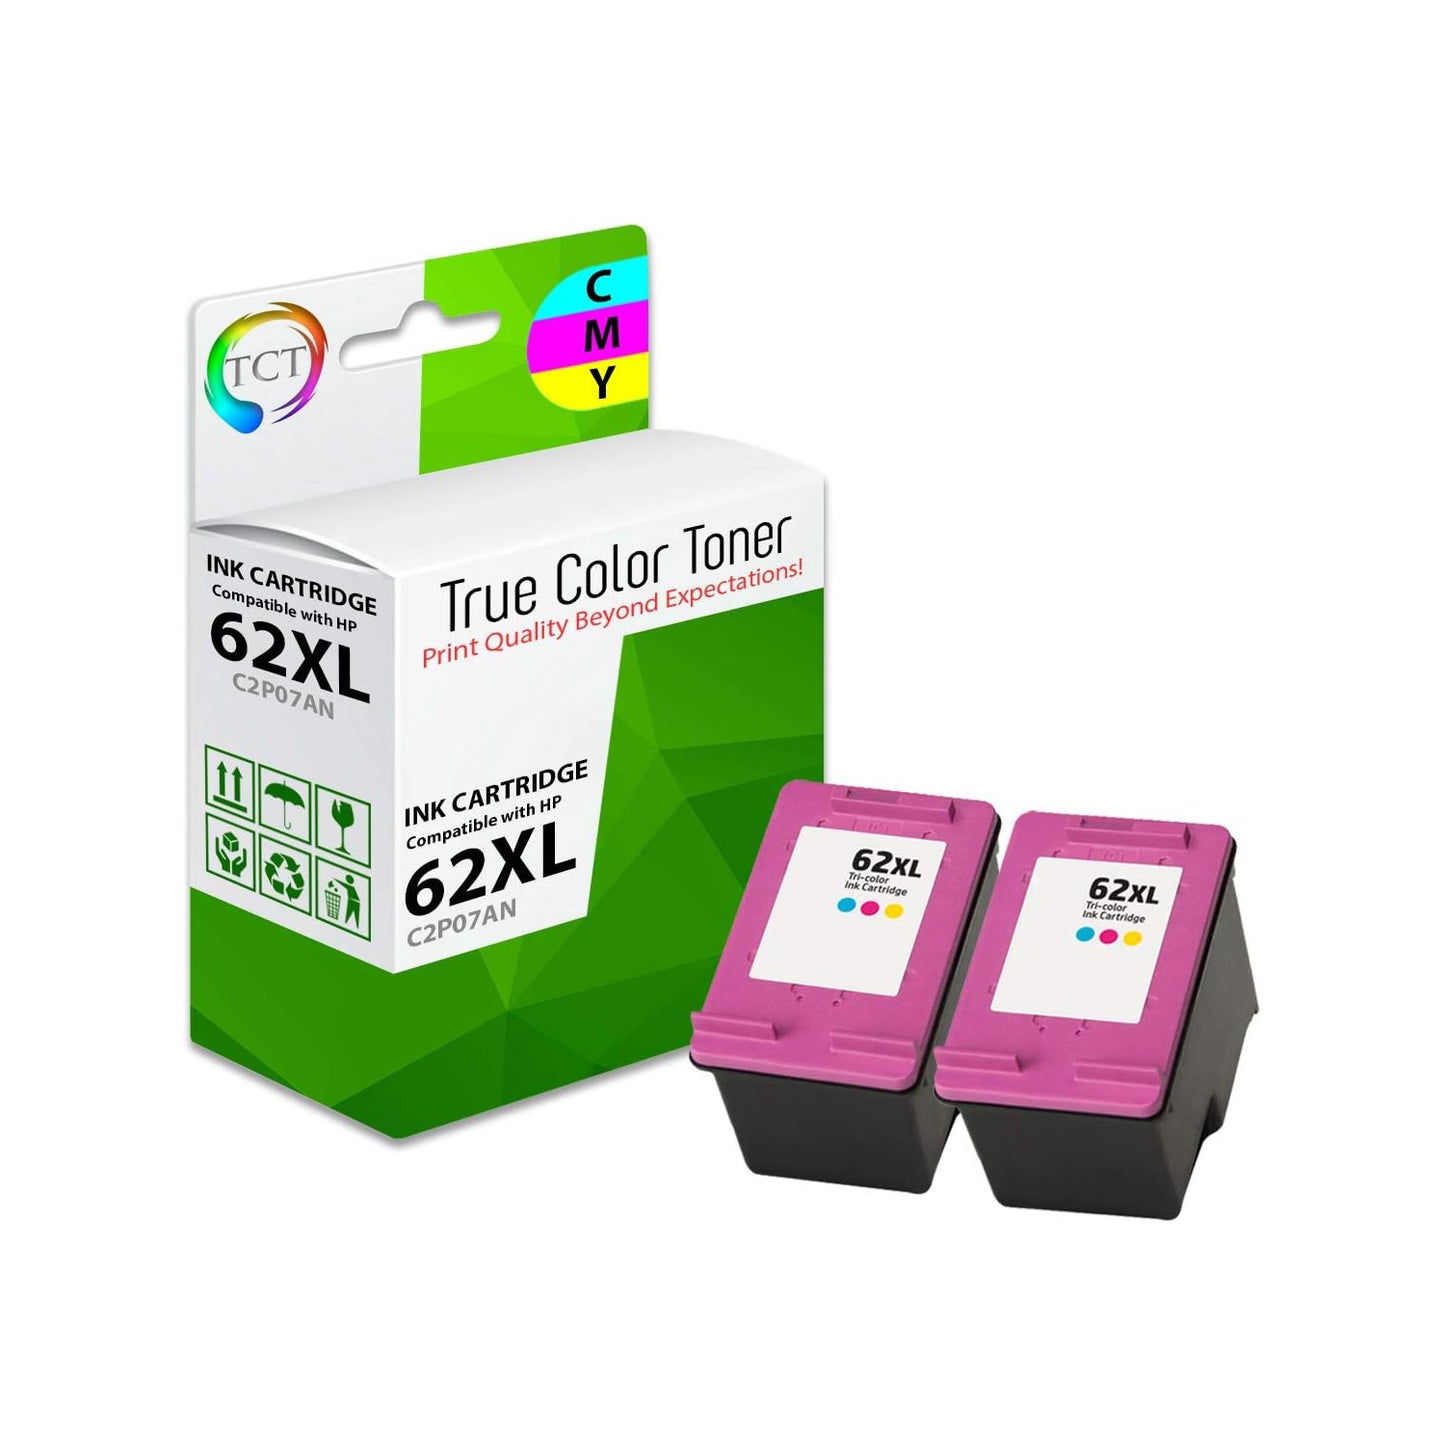 TCT Compatible Ink Cartridge Replacement for the HP 62XL Series - 2 Pack Color